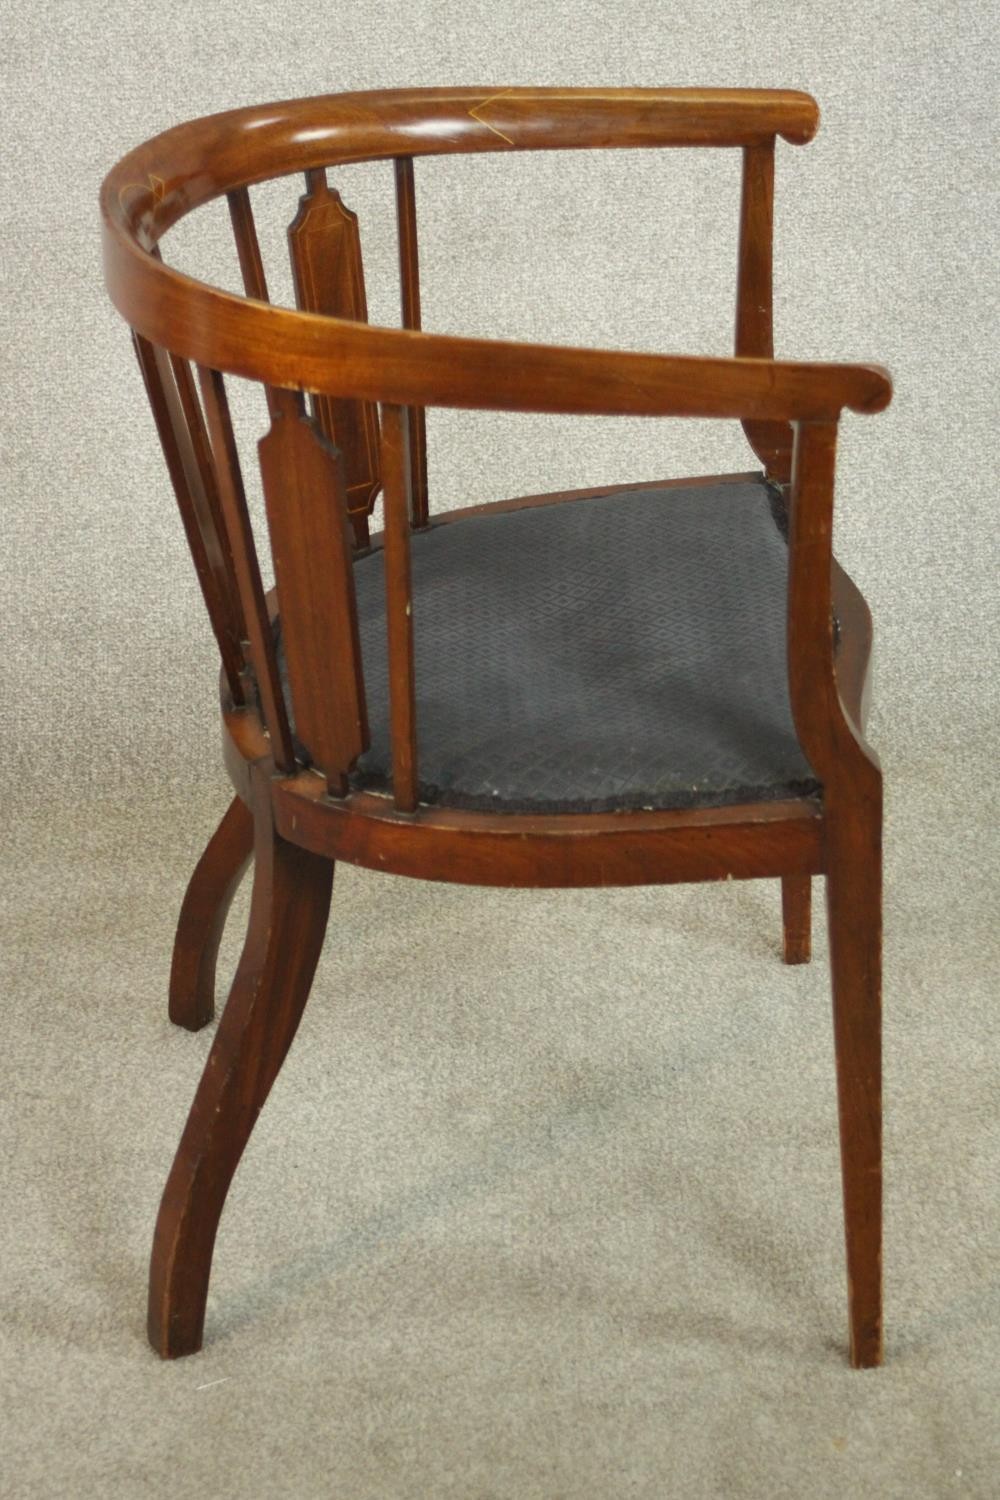 An Edwardian mahogany and inlaid tub chair, the serpentine fronted seat upholstered in dark grey - Image 3 of 7